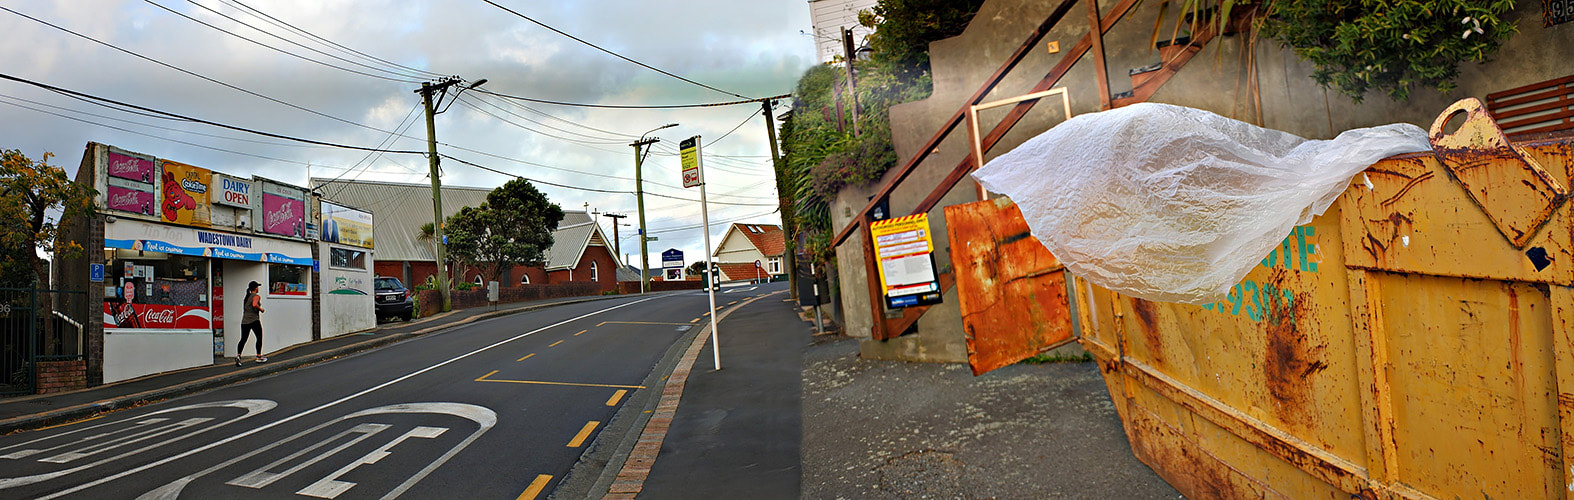 Reg Feuz - Wadestown Road, Wellington, New Zealand, 4 April 2020, photography during the covid-19 lockdown in New Zealnd, Photospace Gallery contemporary New Zealand photography wellington nz, a month of sundays online exhibition